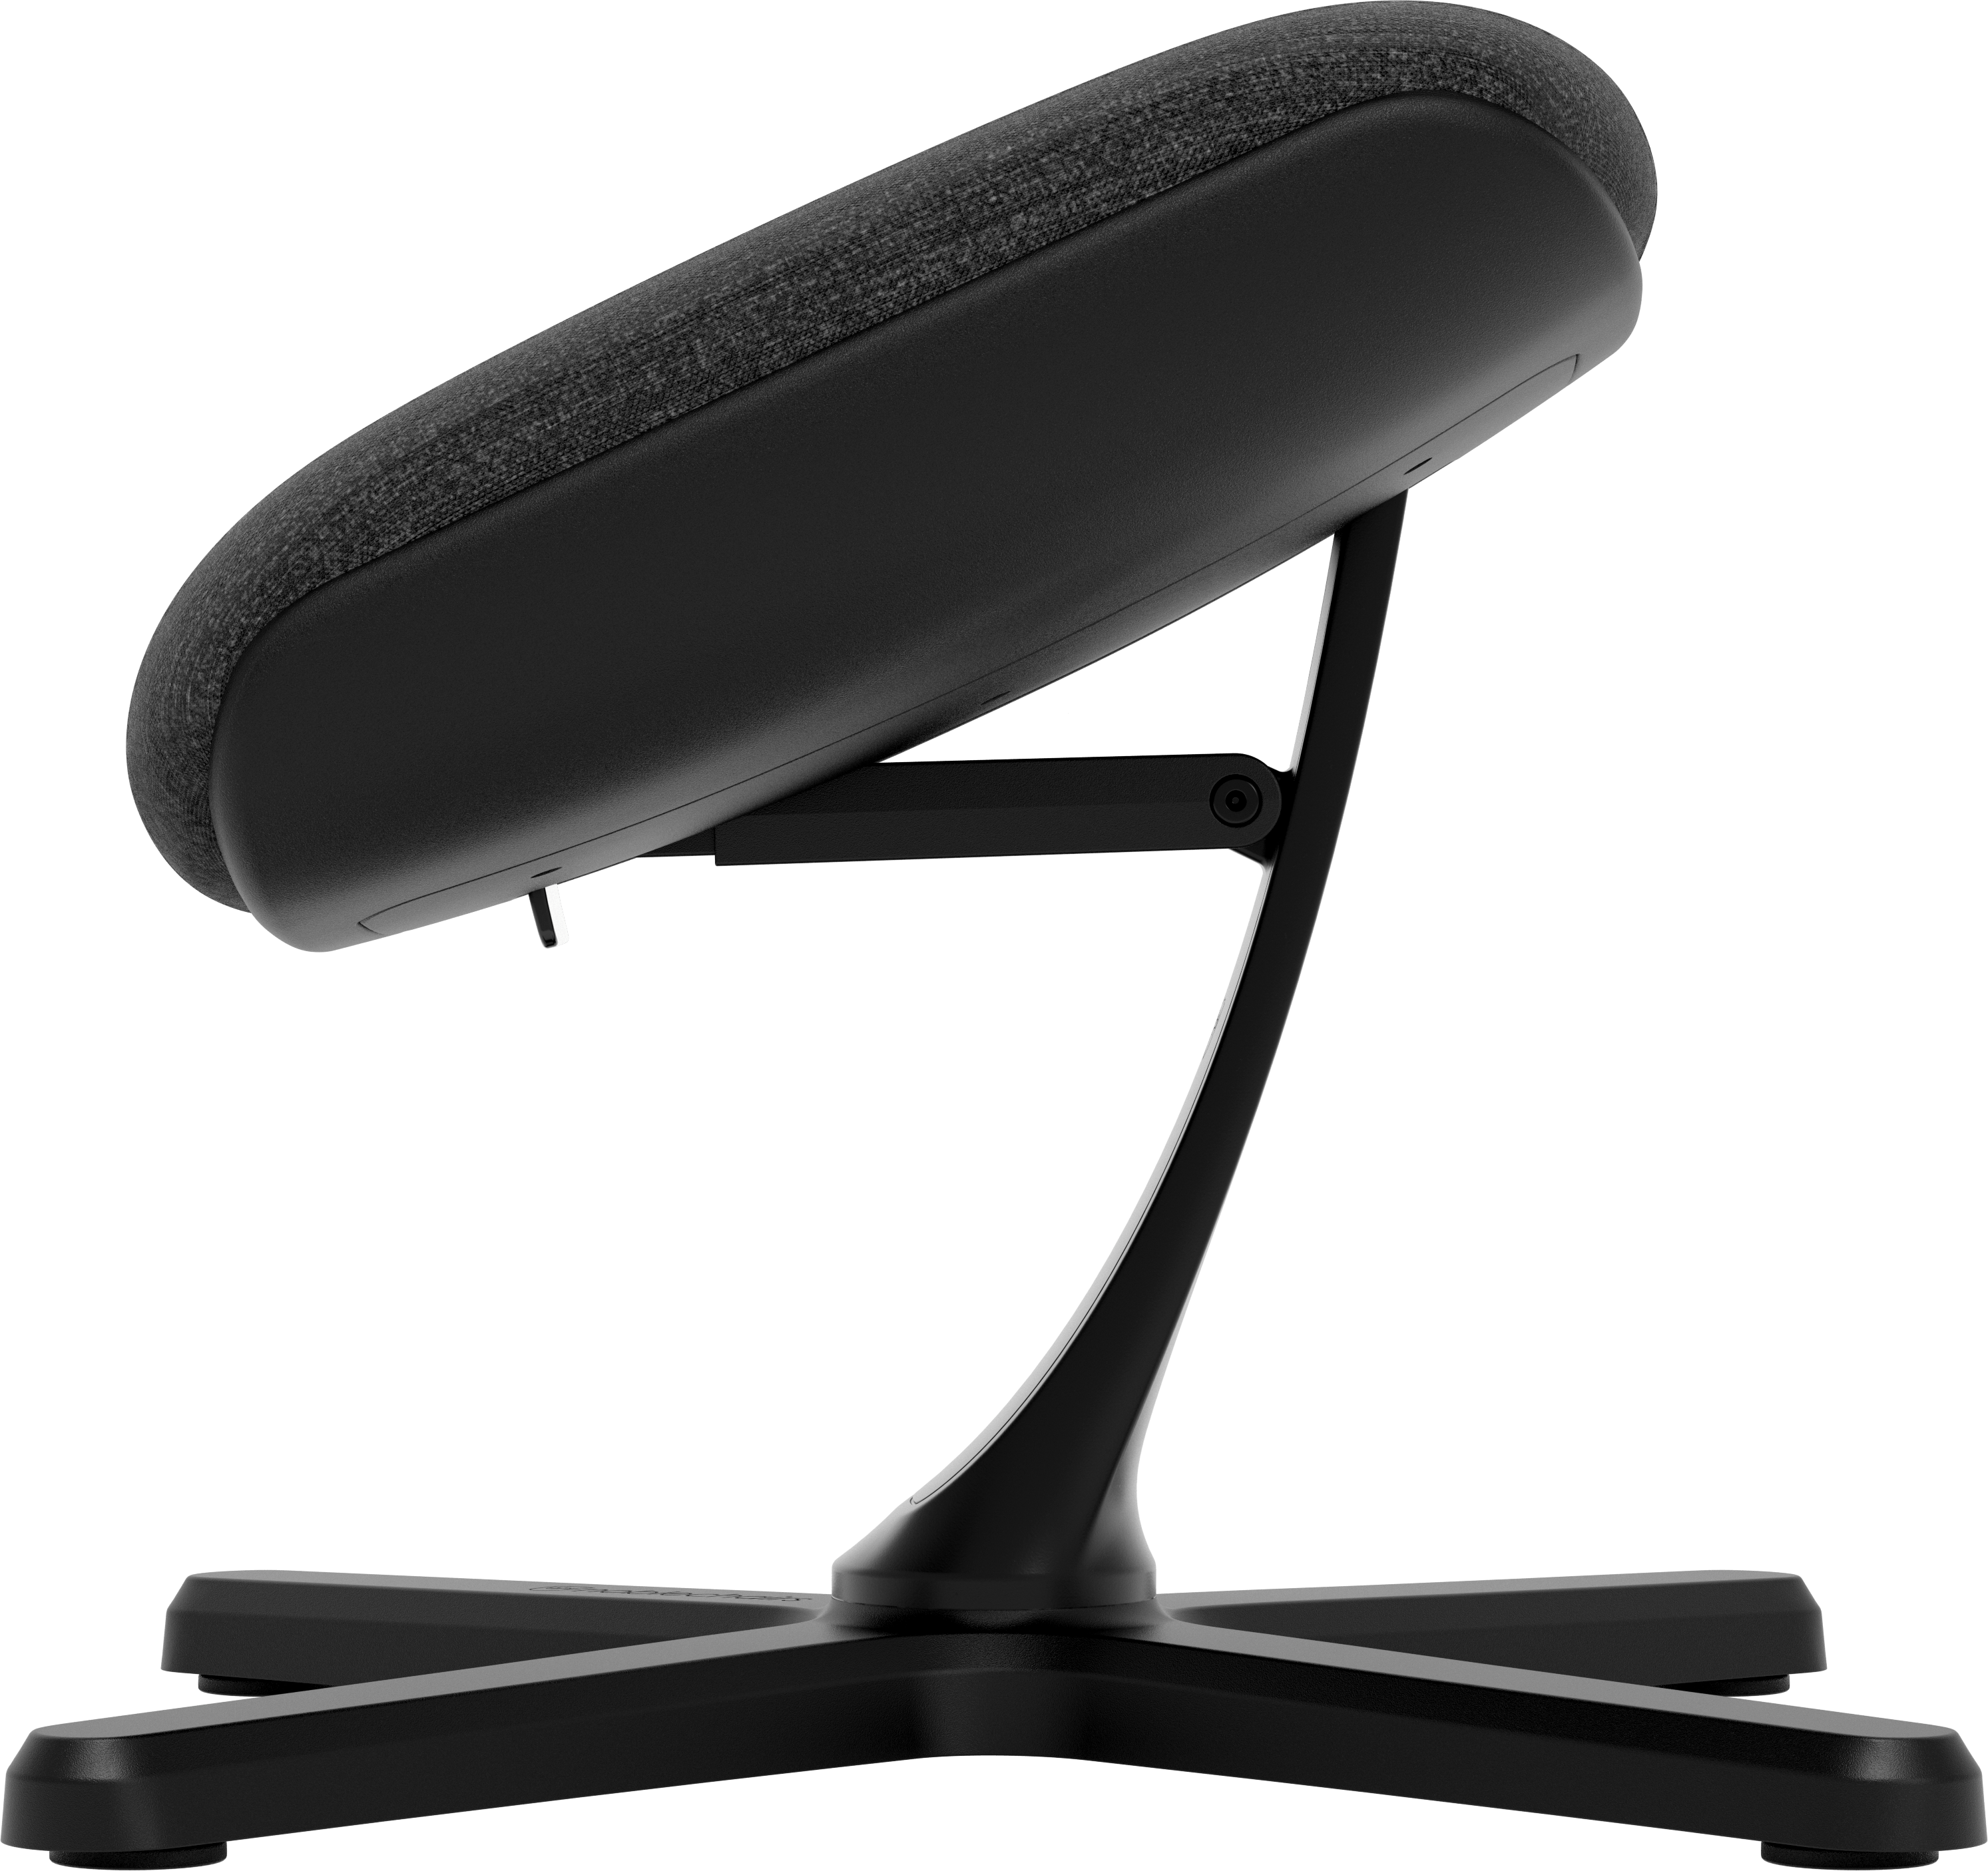 noblechairs Footrest 2 - TX Anthracite adjustable features